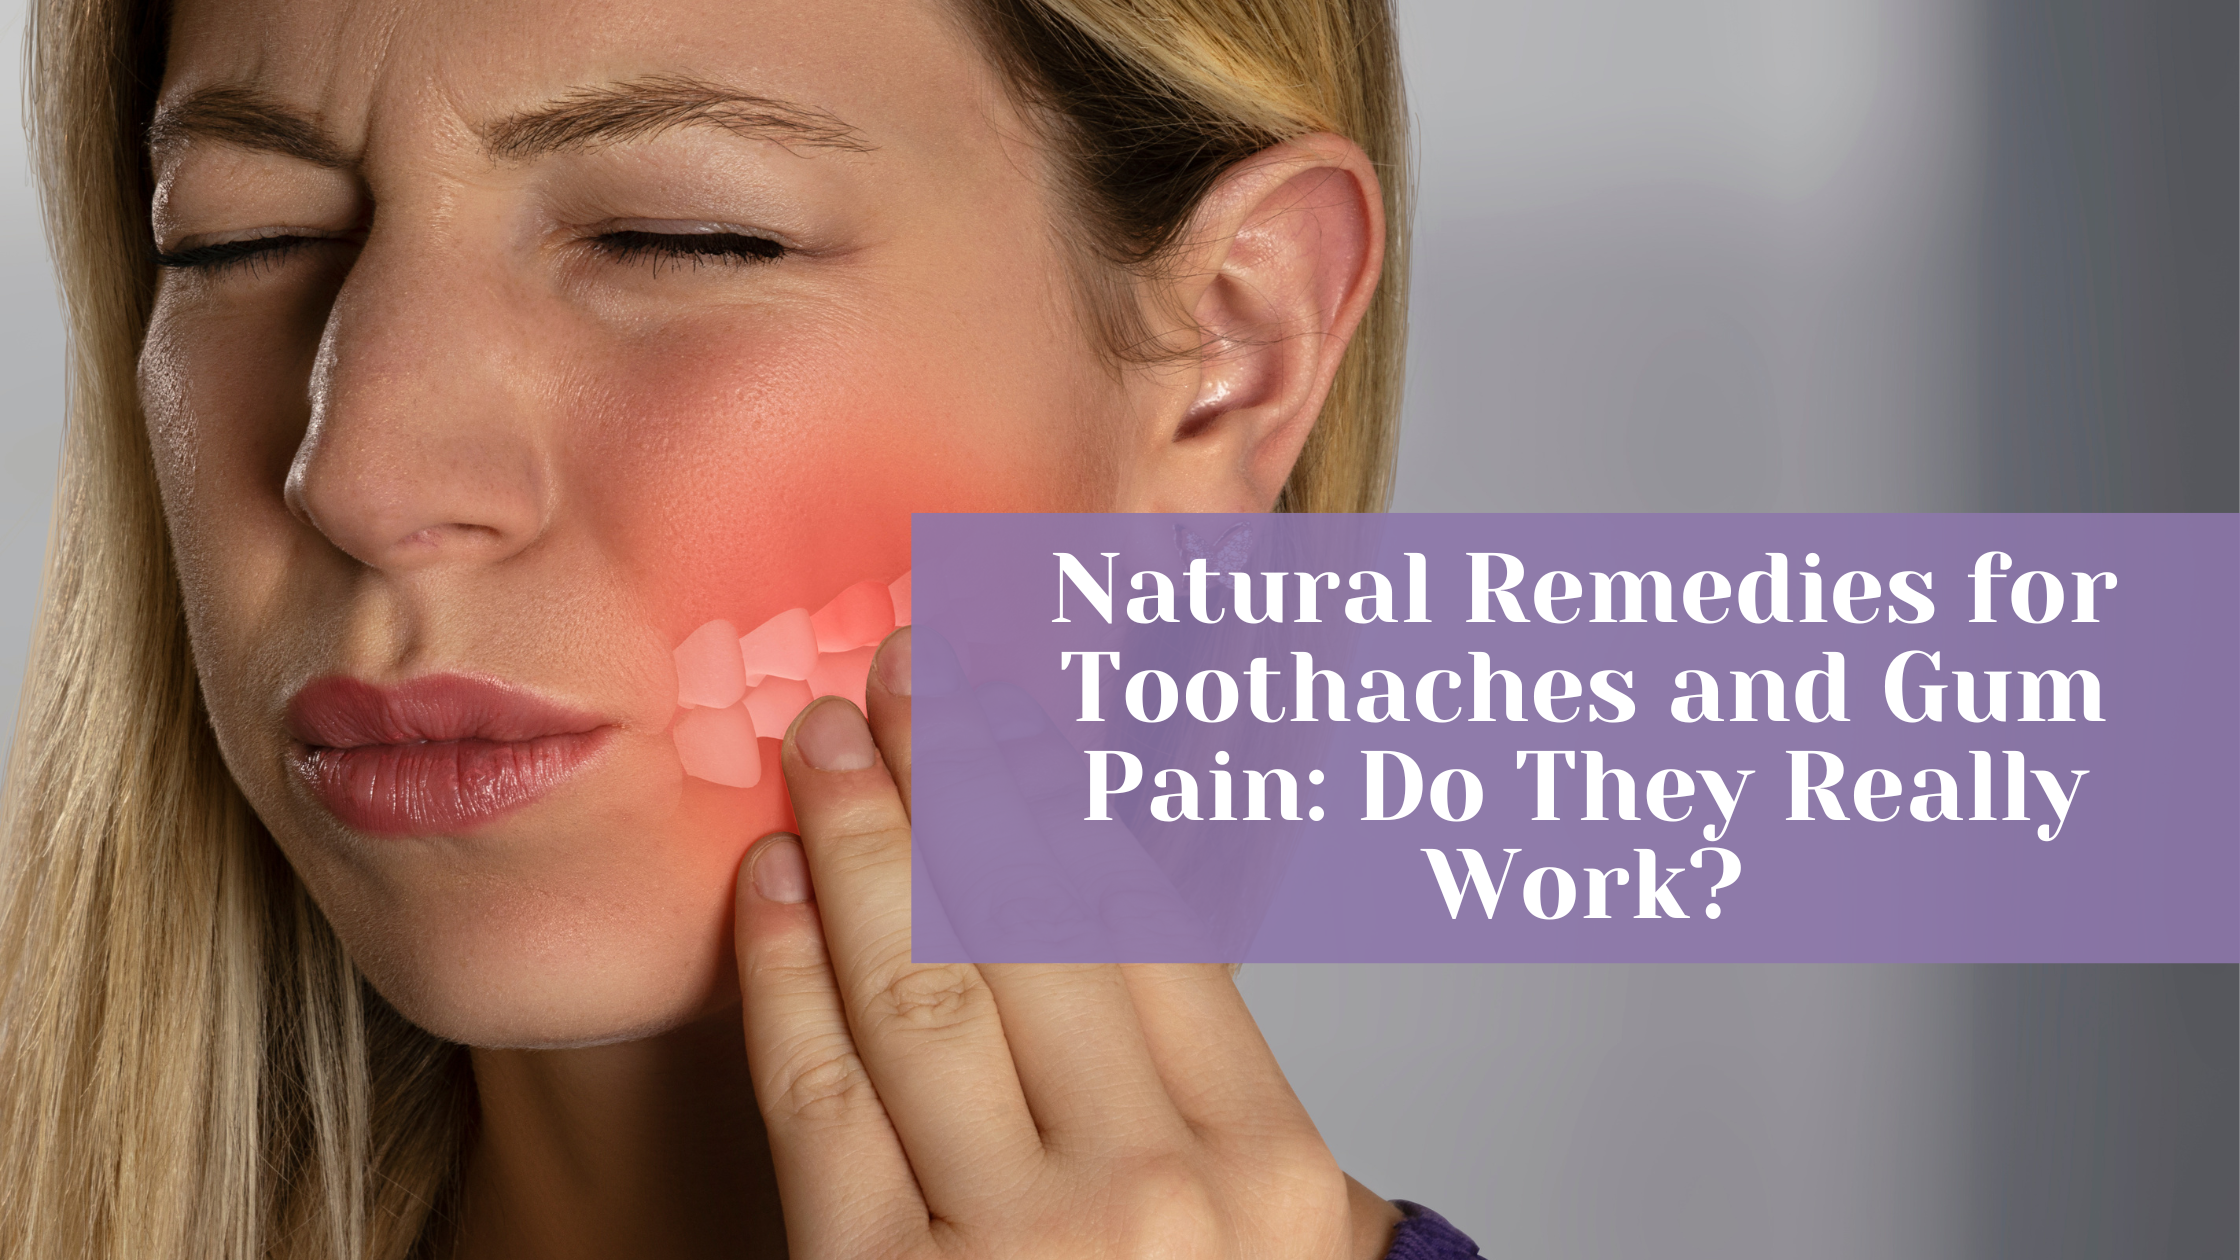 Natural Remedies for Toothaches and Gum Pain: Do They Really Work?